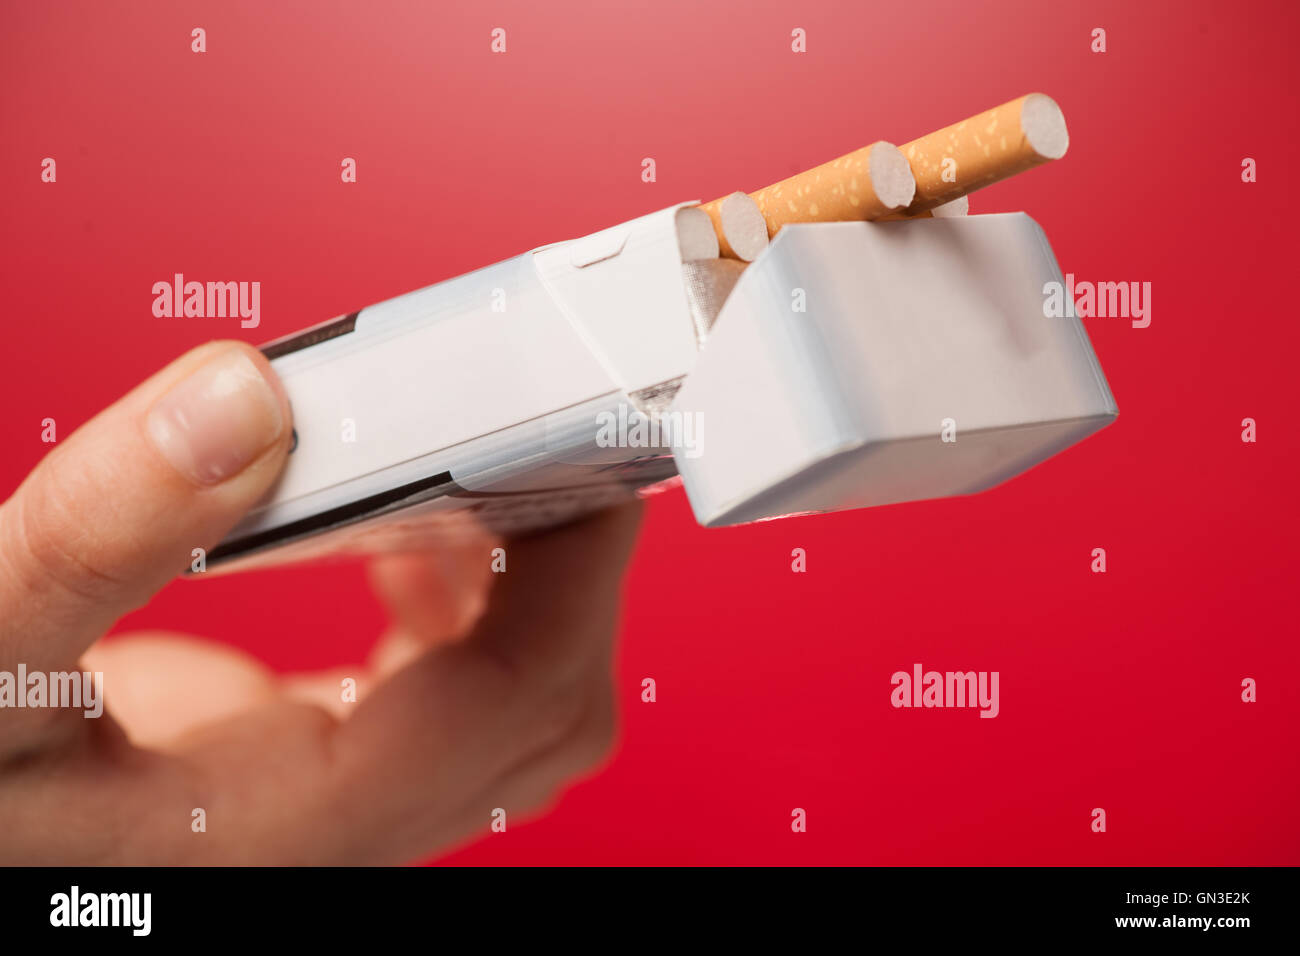 woman offering a cigarette over red background Stock Photo